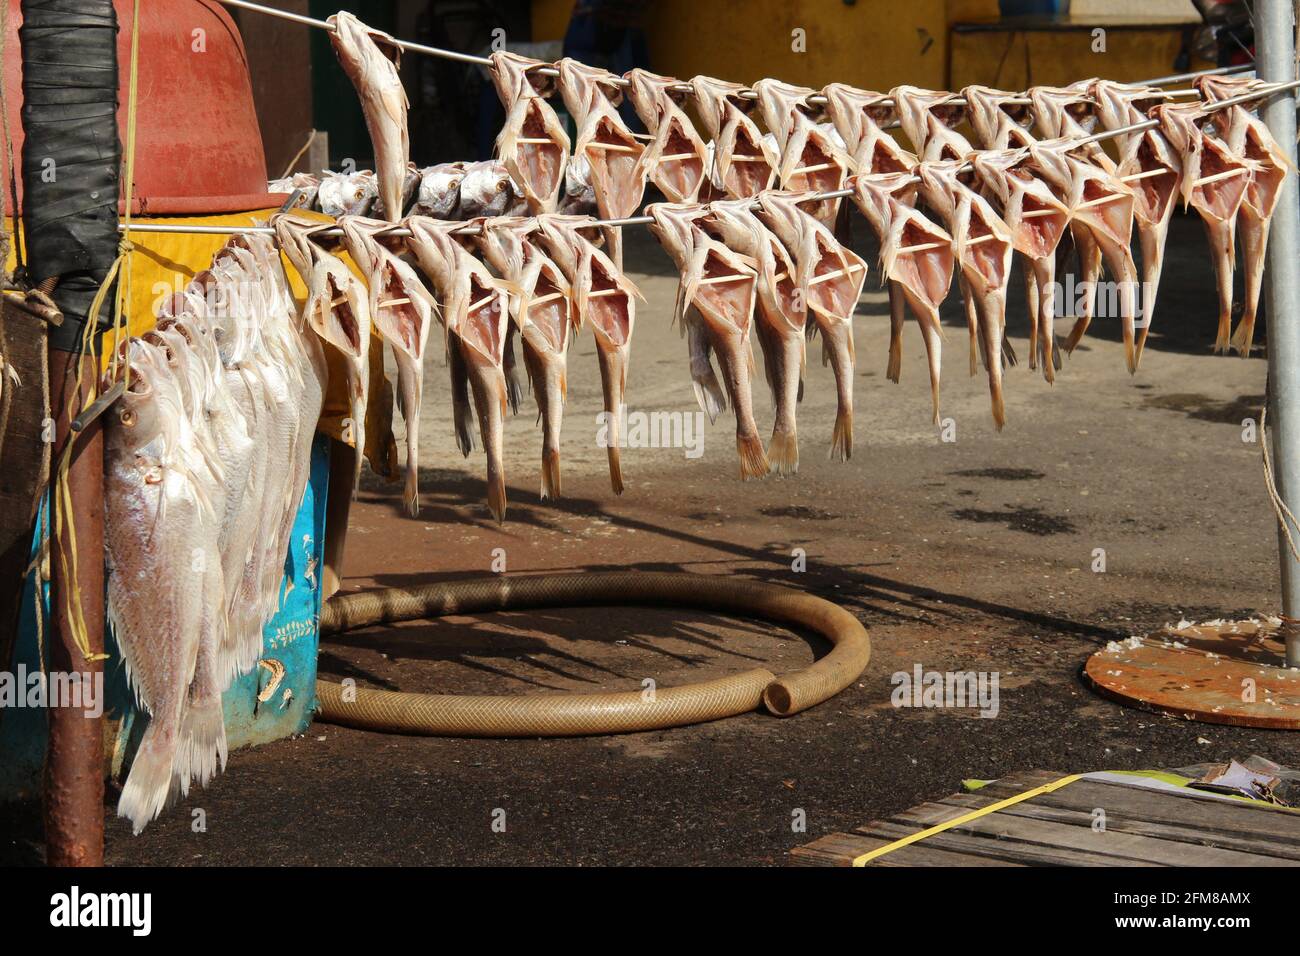 Fish hanging to dry at a seafood market in Busan, South Korea Stock Photo